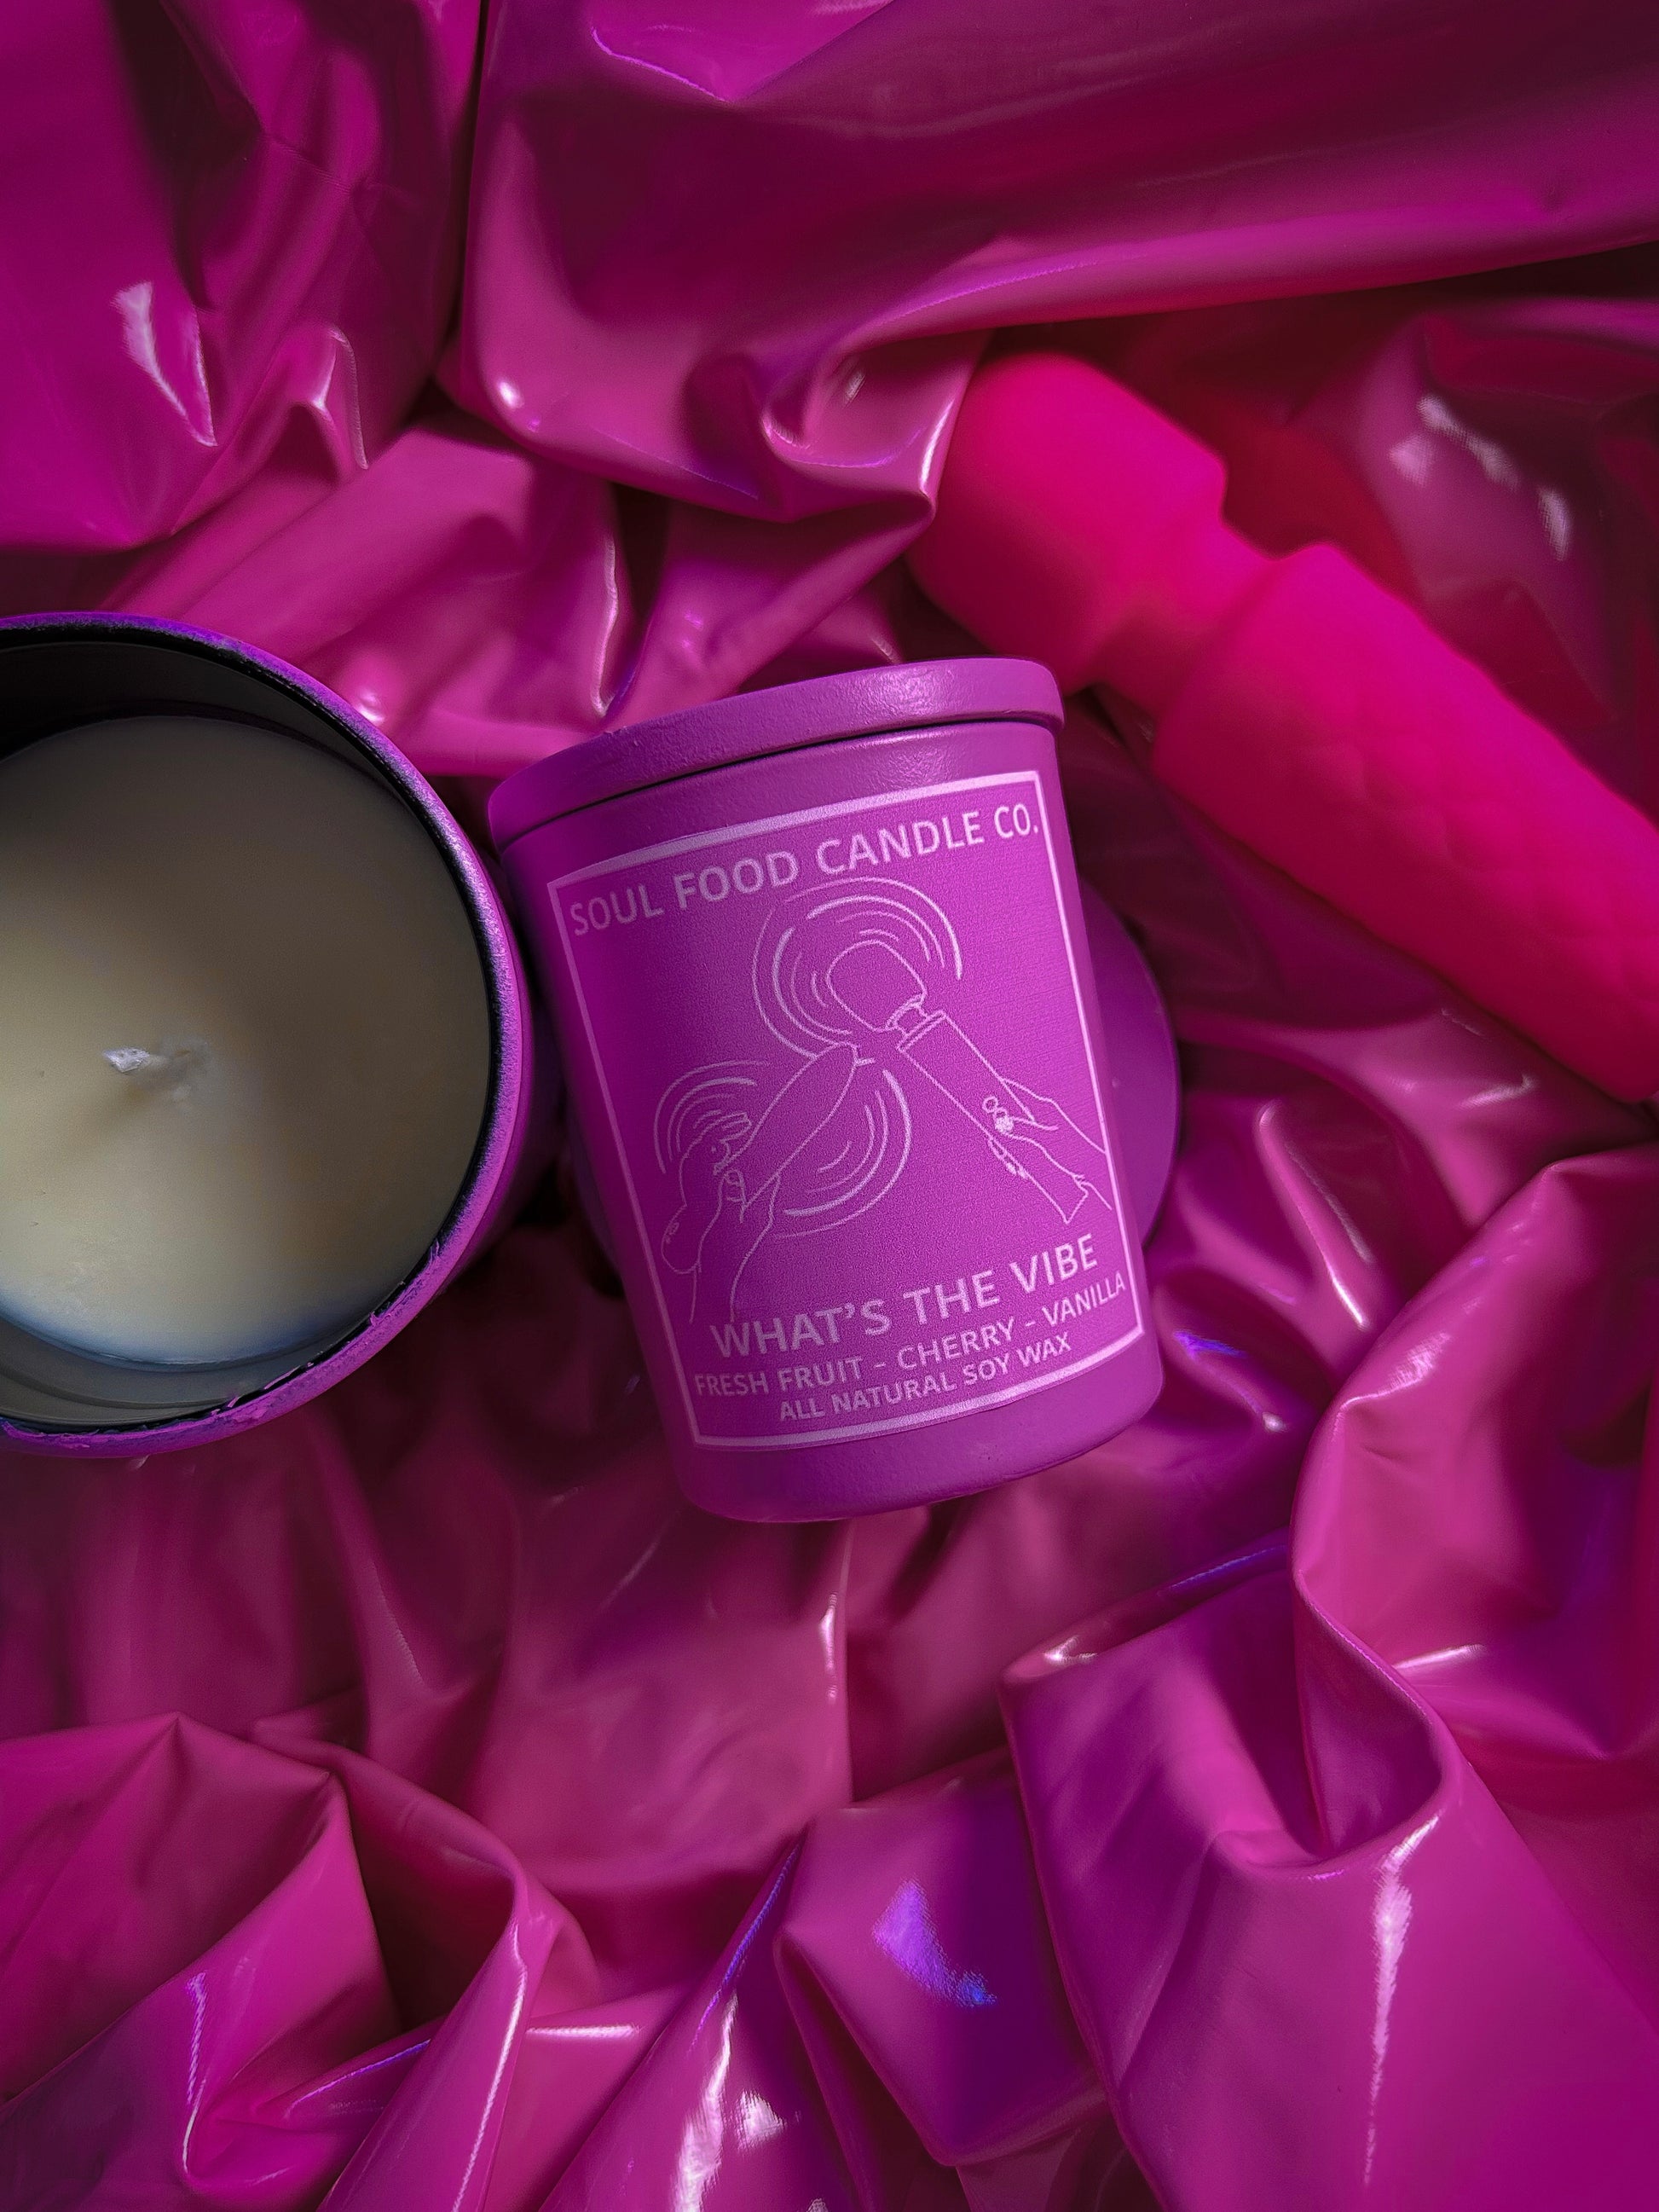 What's The Vibe - Soul Food Candle Company